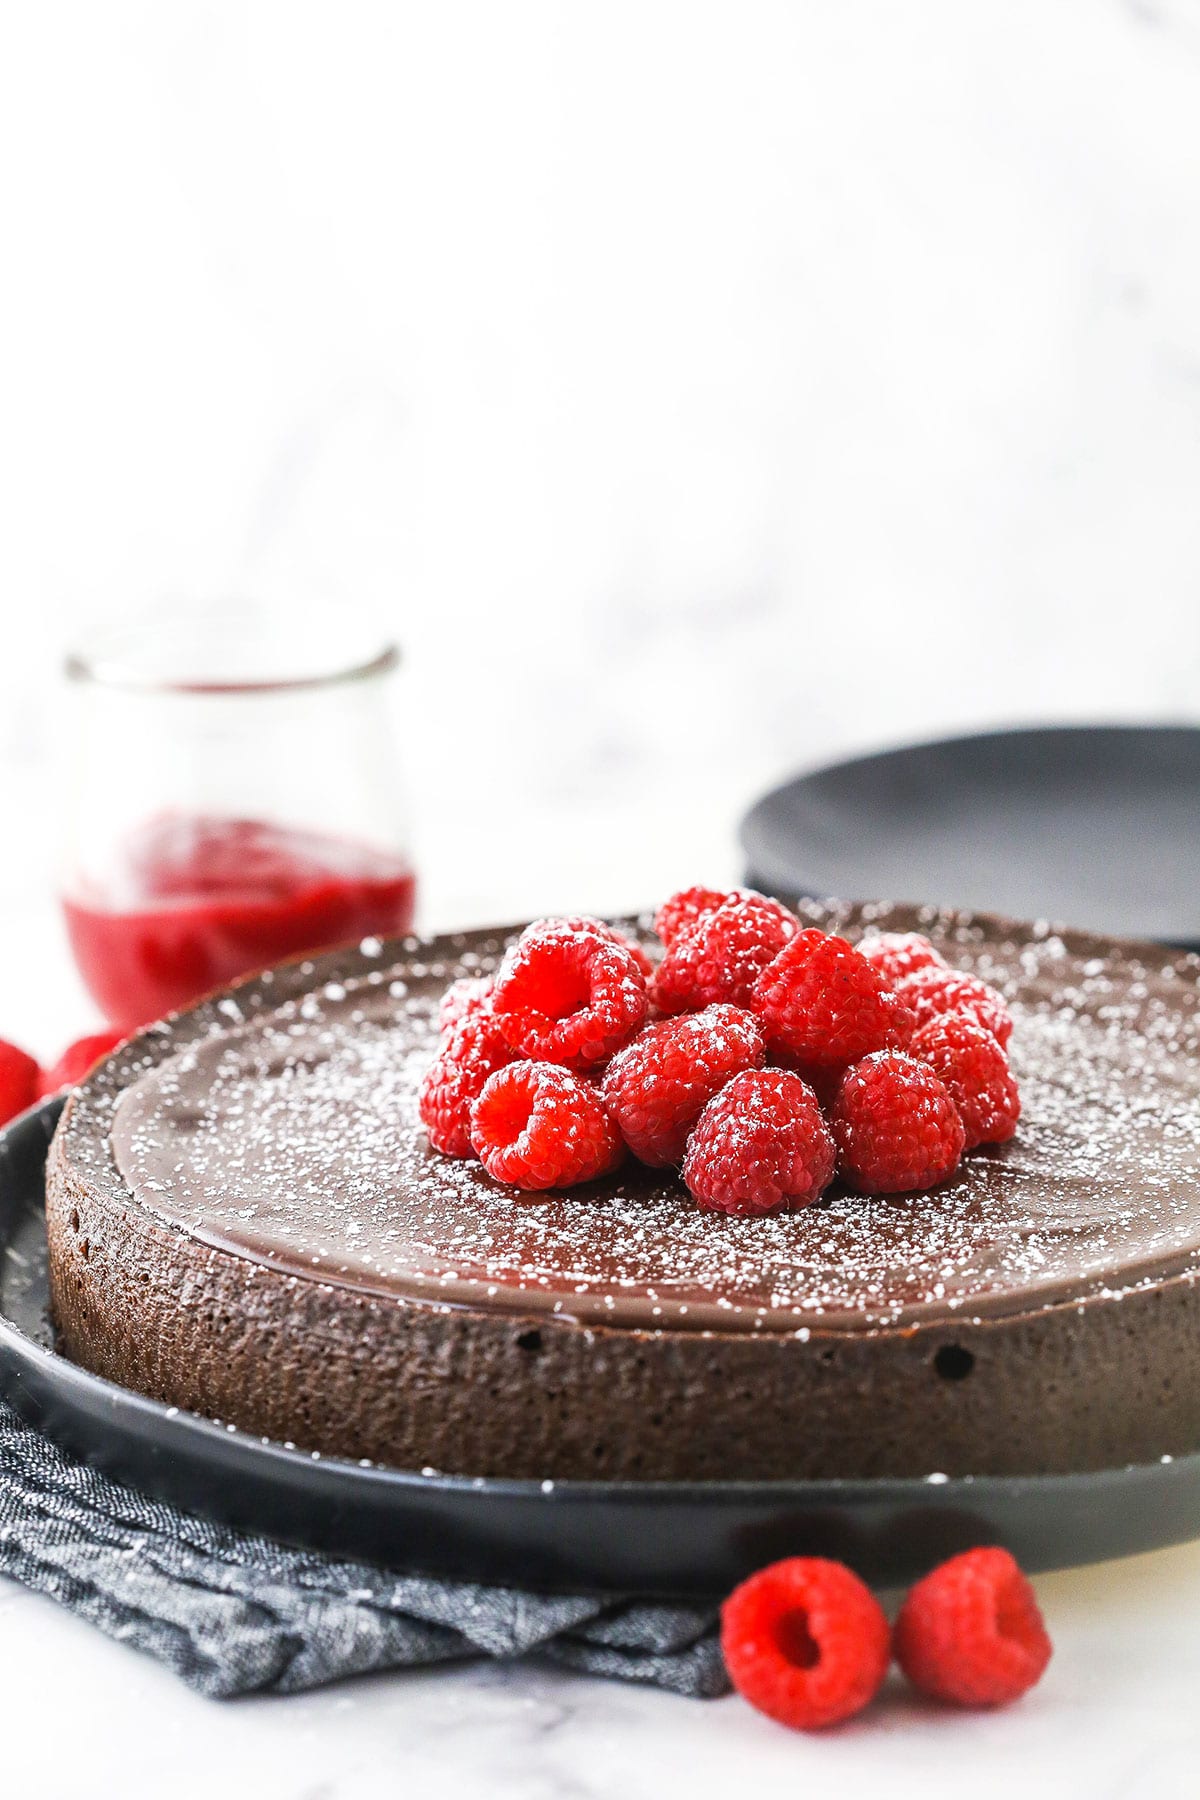 A flourless chocolate cake on a platter with two raspberries in the foreground and a plate in the background